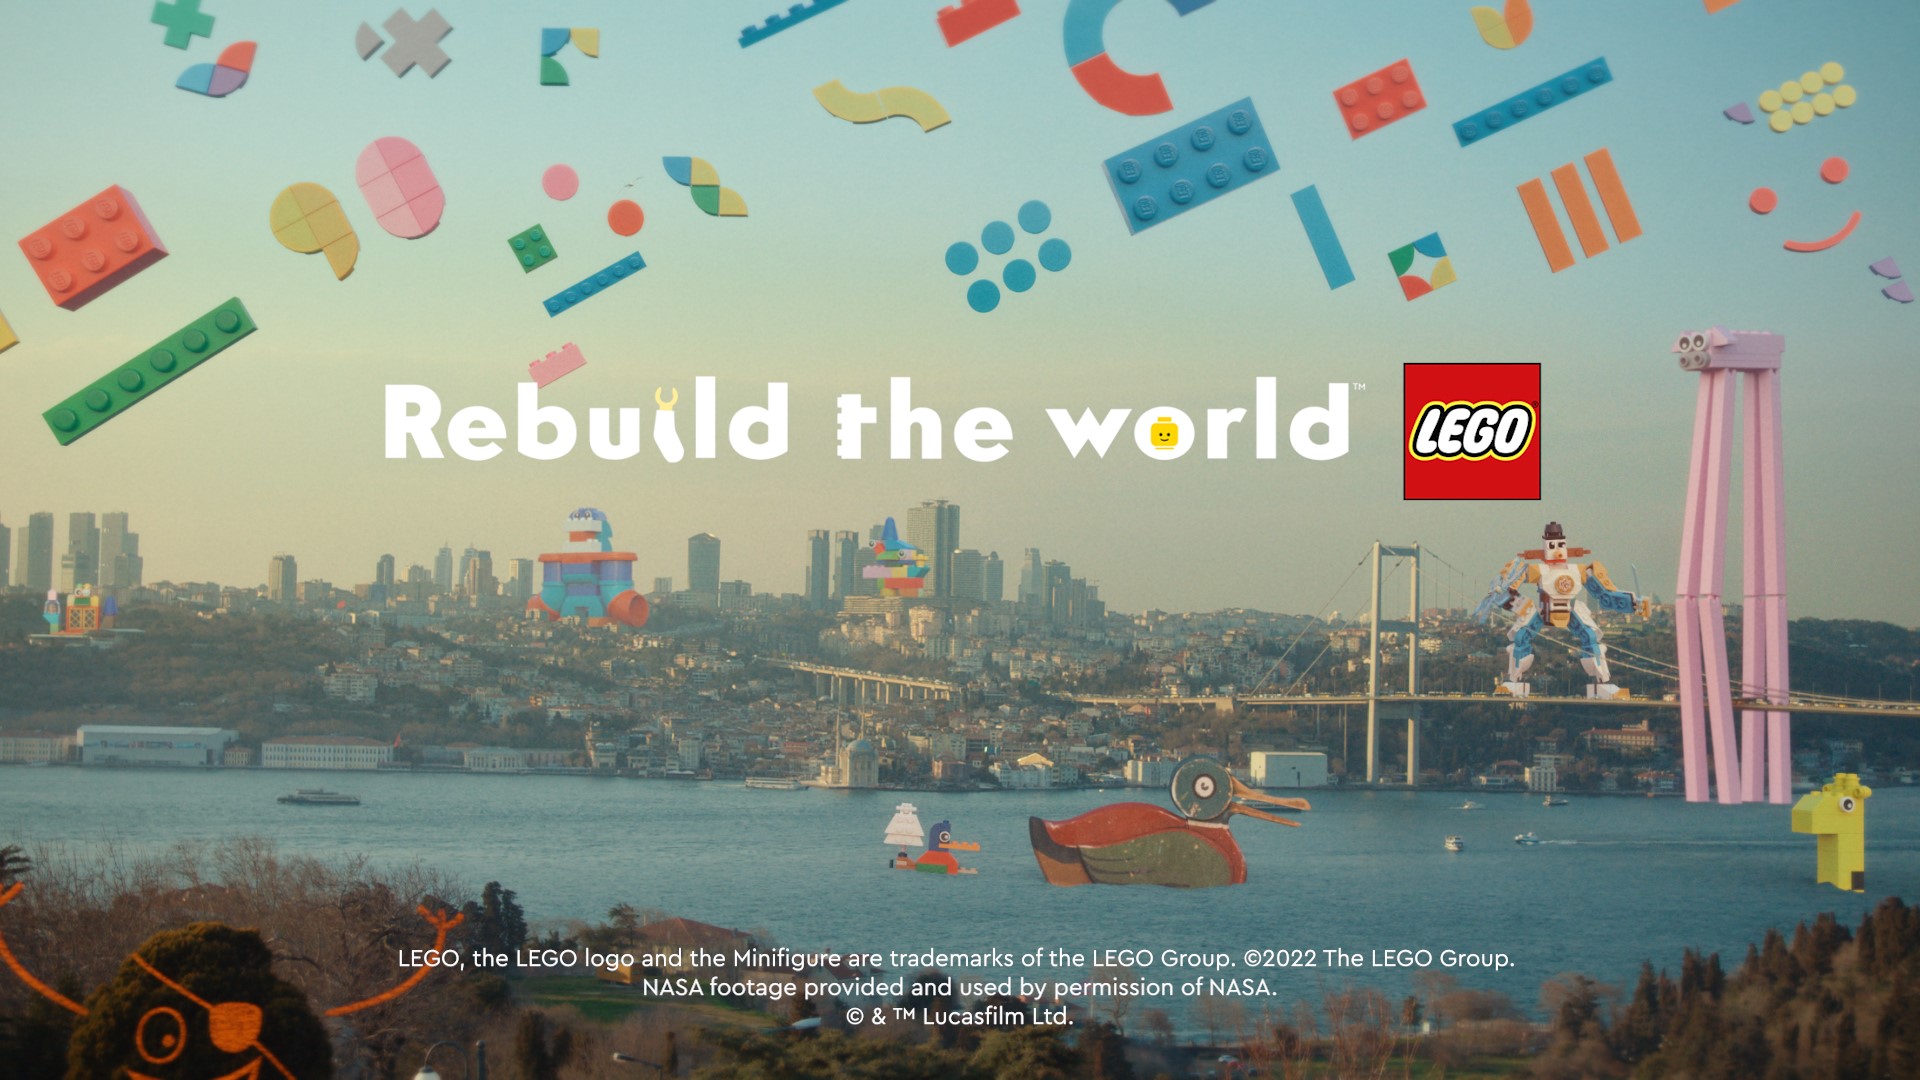 New LEGO® campaign celebrates 90 years of Rebuilding the World through play  - About Us - LEGO.com